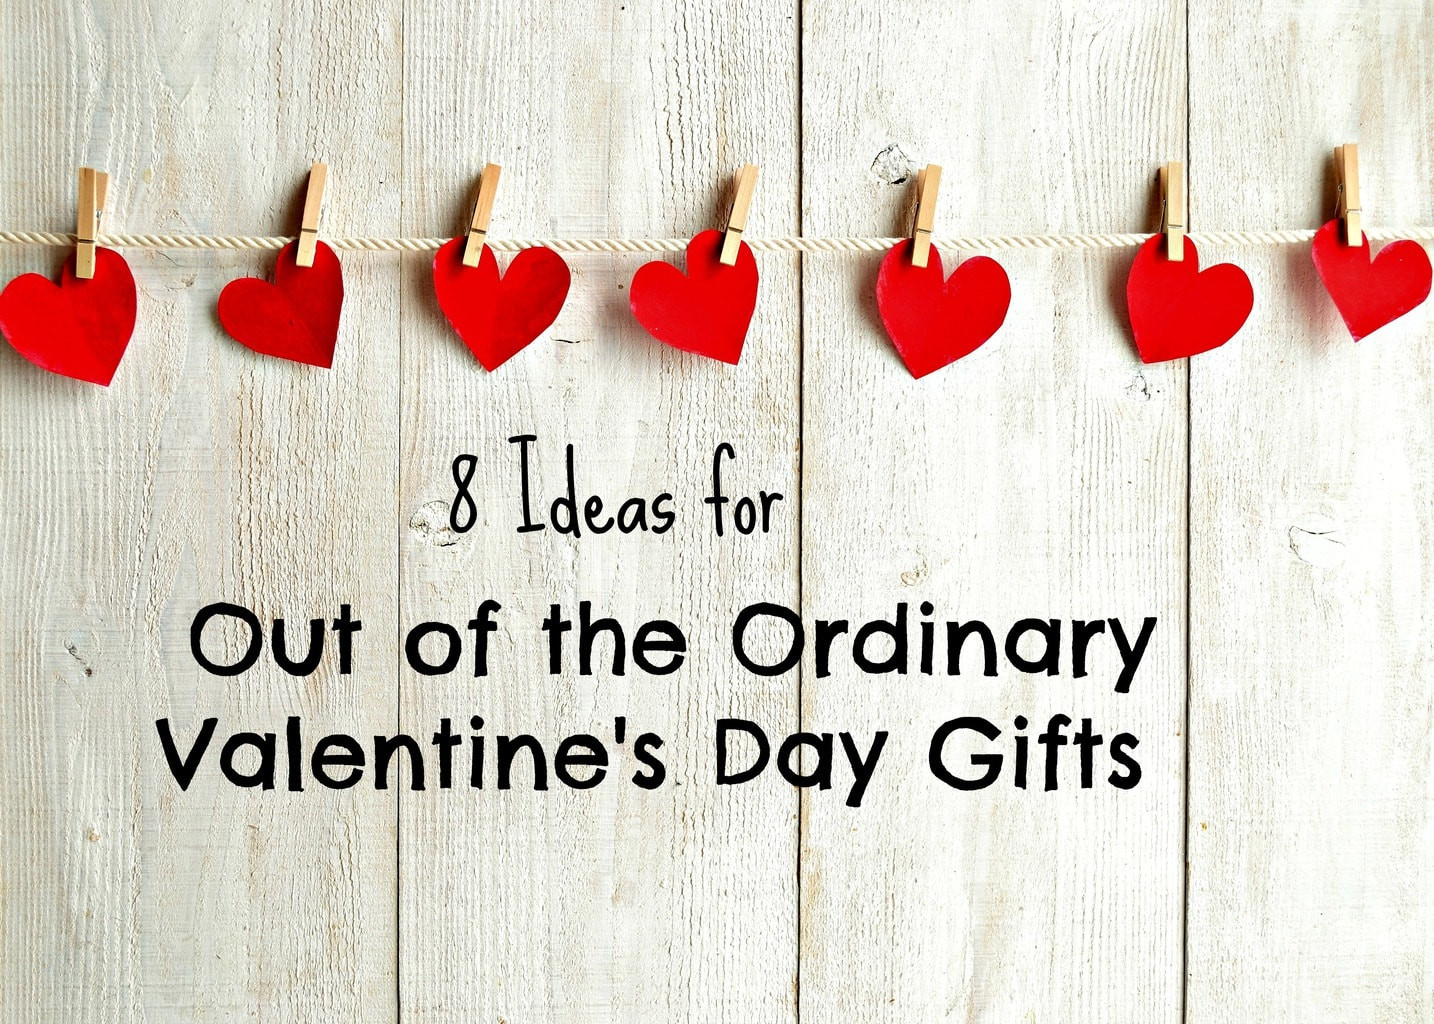 Cheap Valentines Day Date Ideas
 Inexpensive Date Night Ideas for Valentine s Day